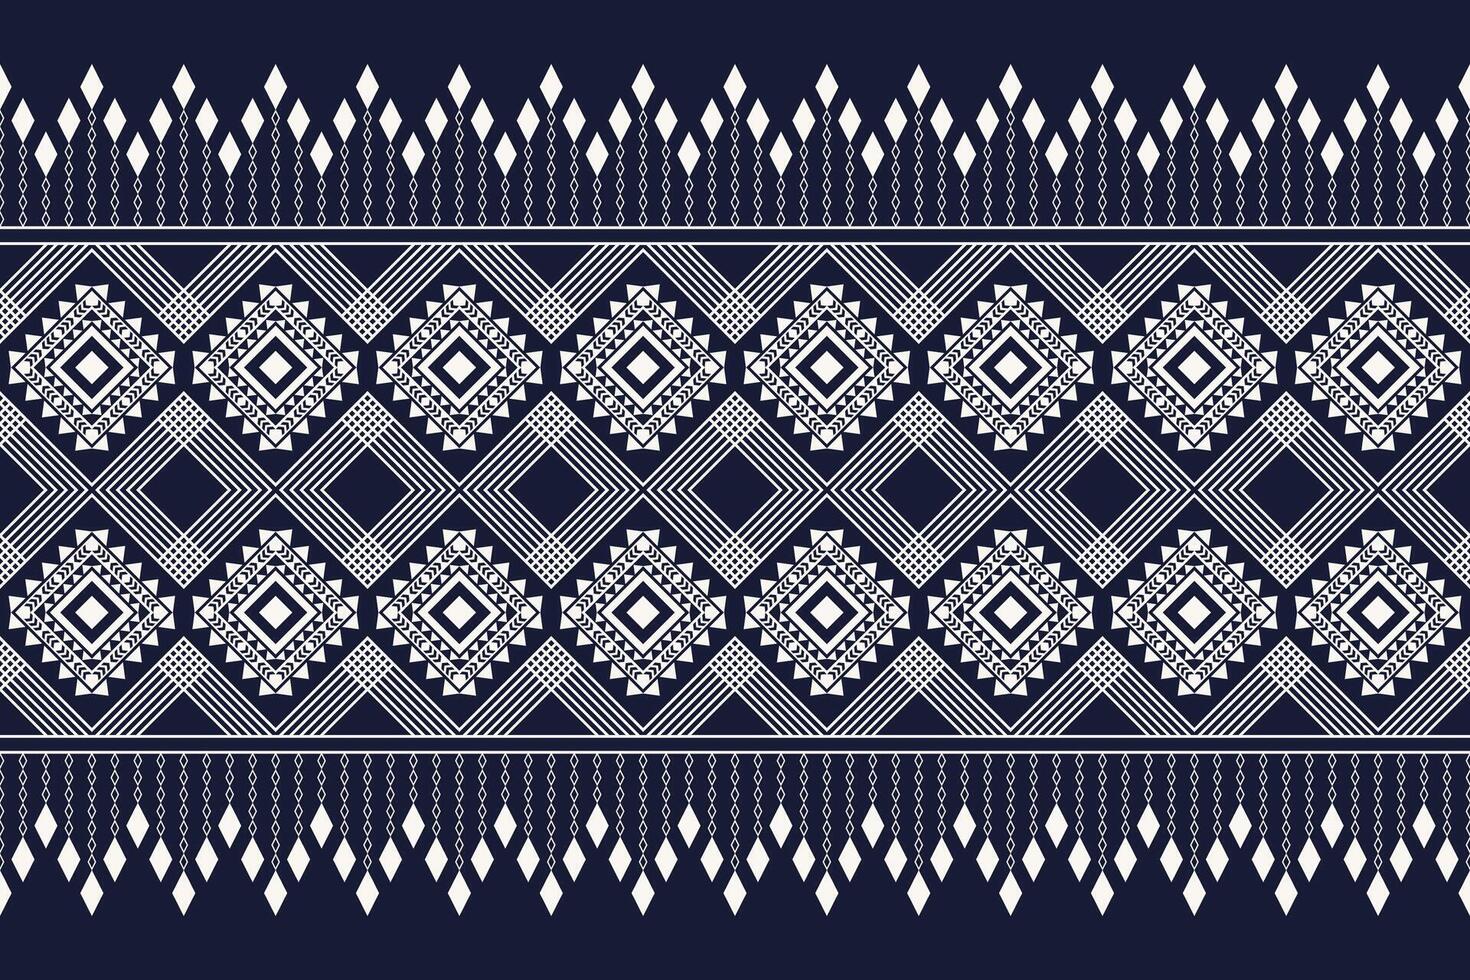 Vertical ikat geometric traditional style,seamless pattern and line texture background. Use for fabric, textile, decoration elements. vector